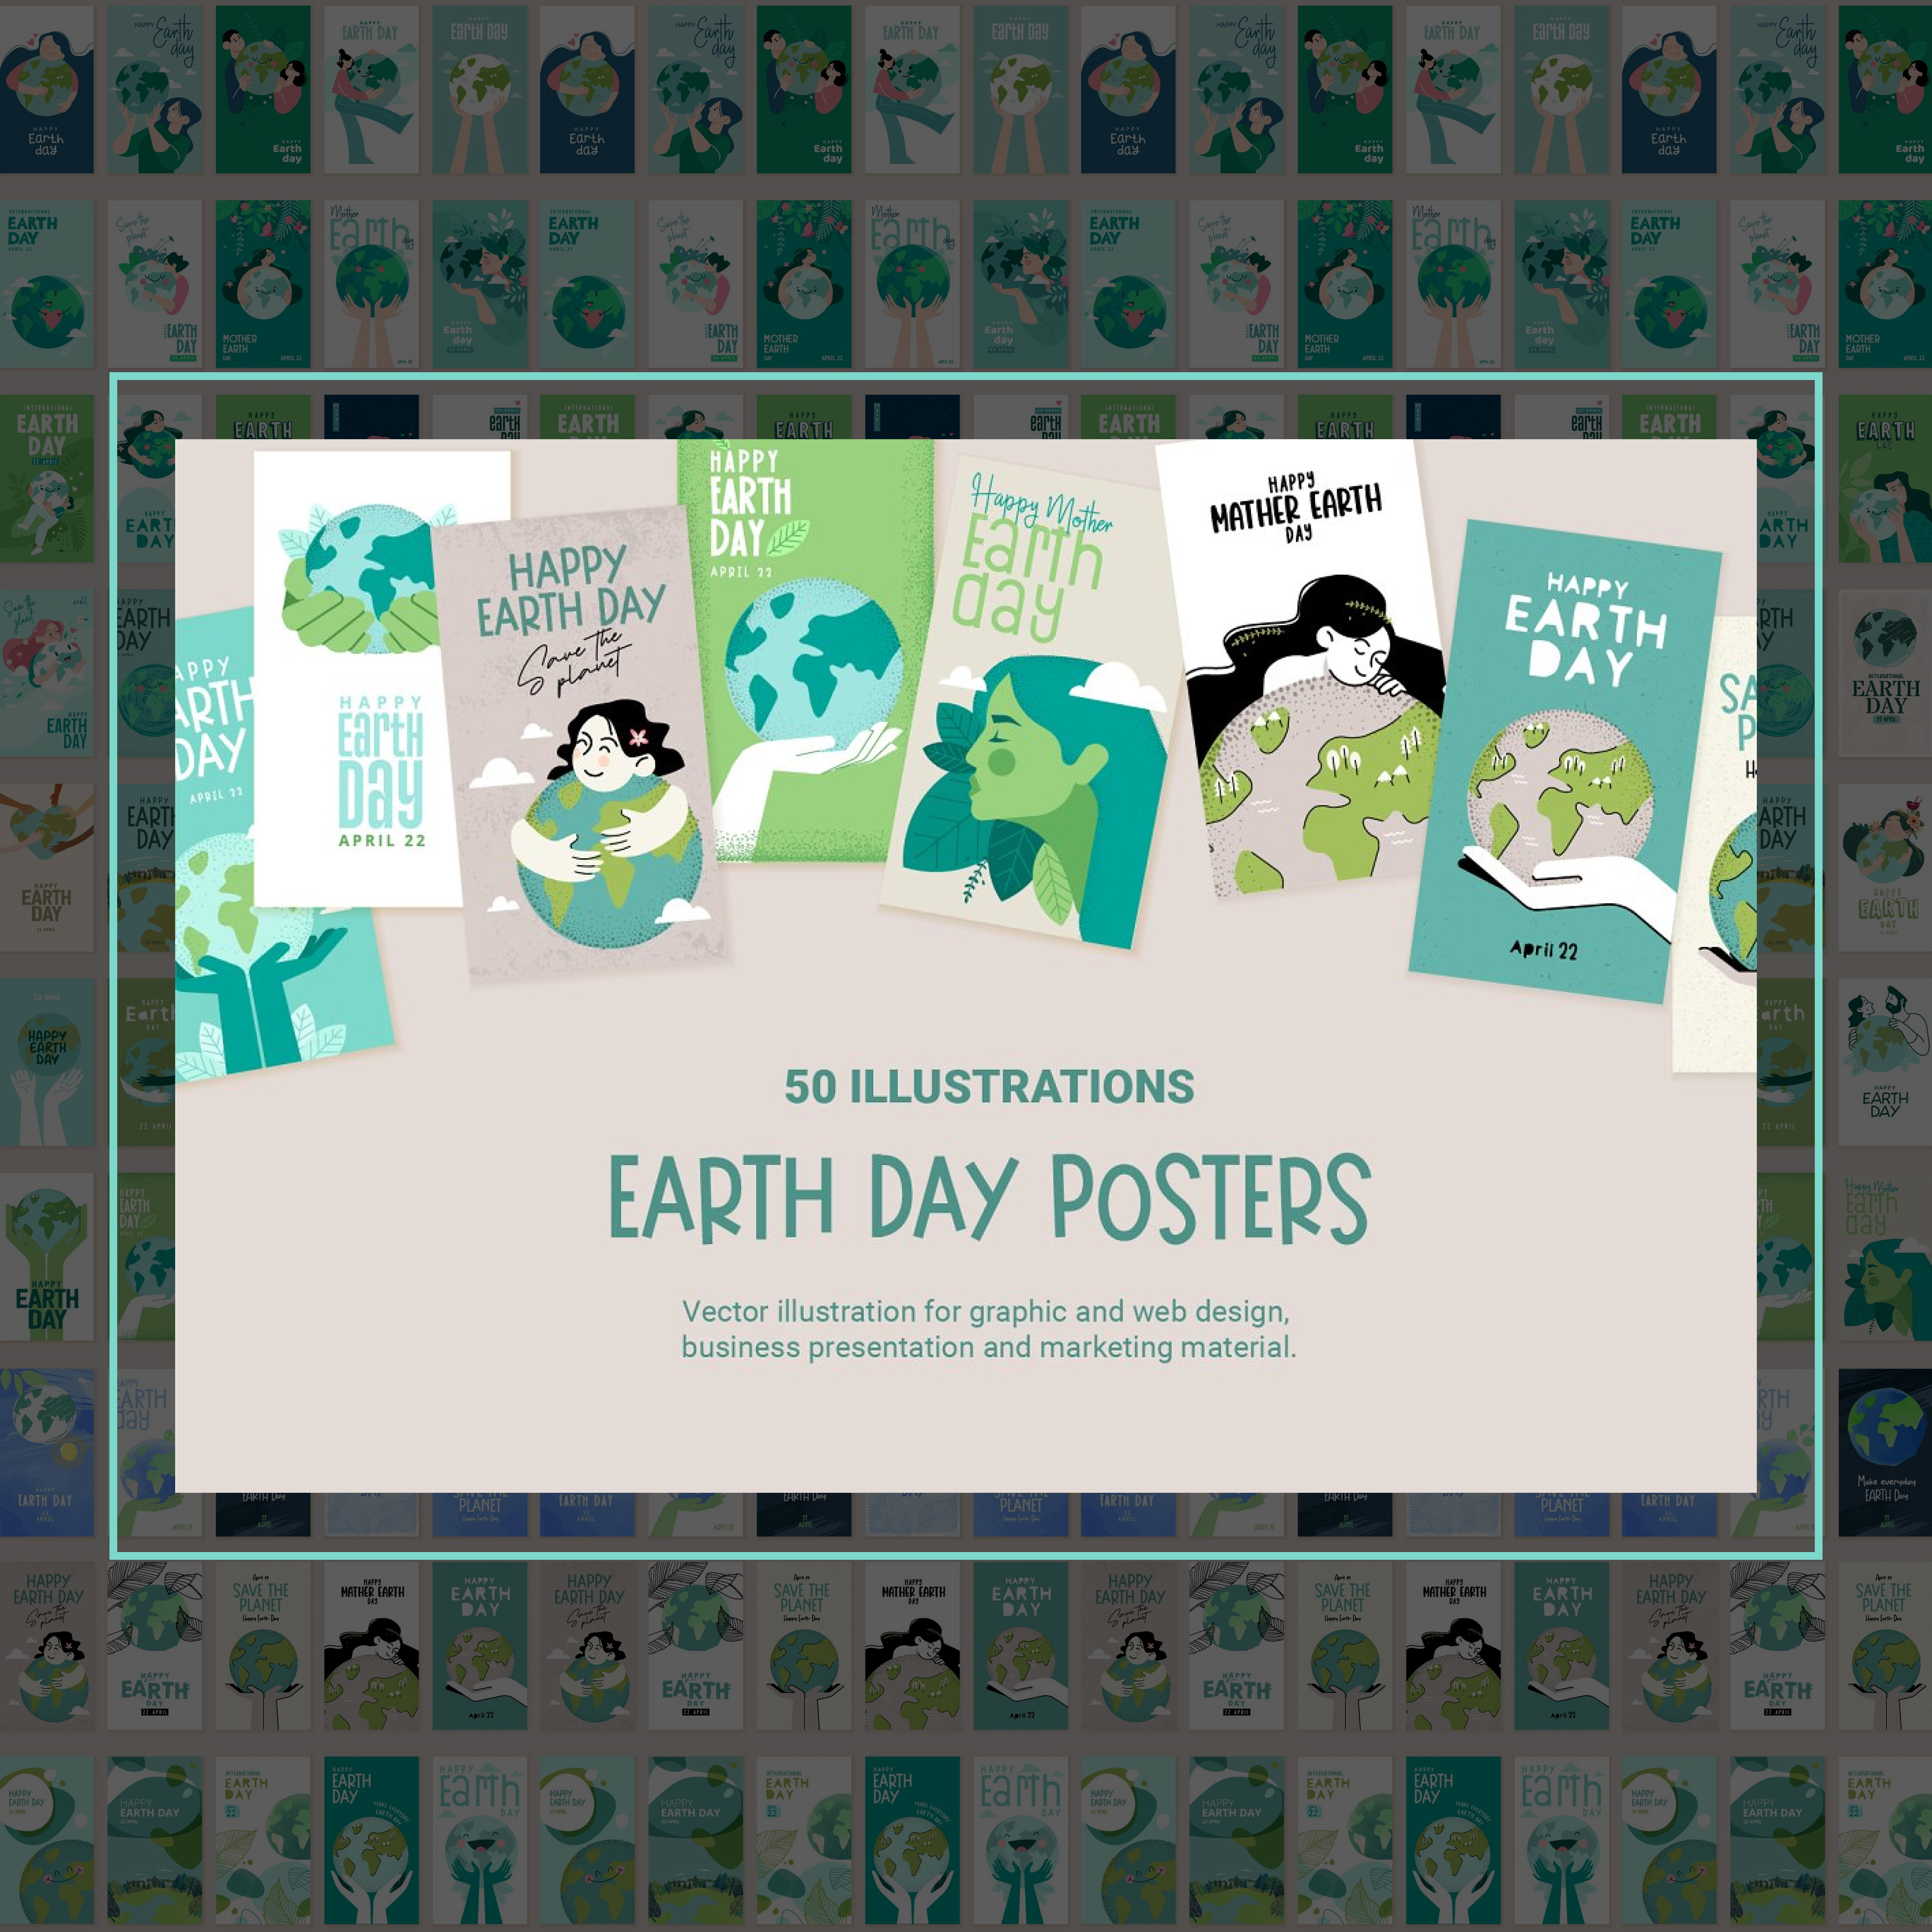 Images with earth day illustrations.